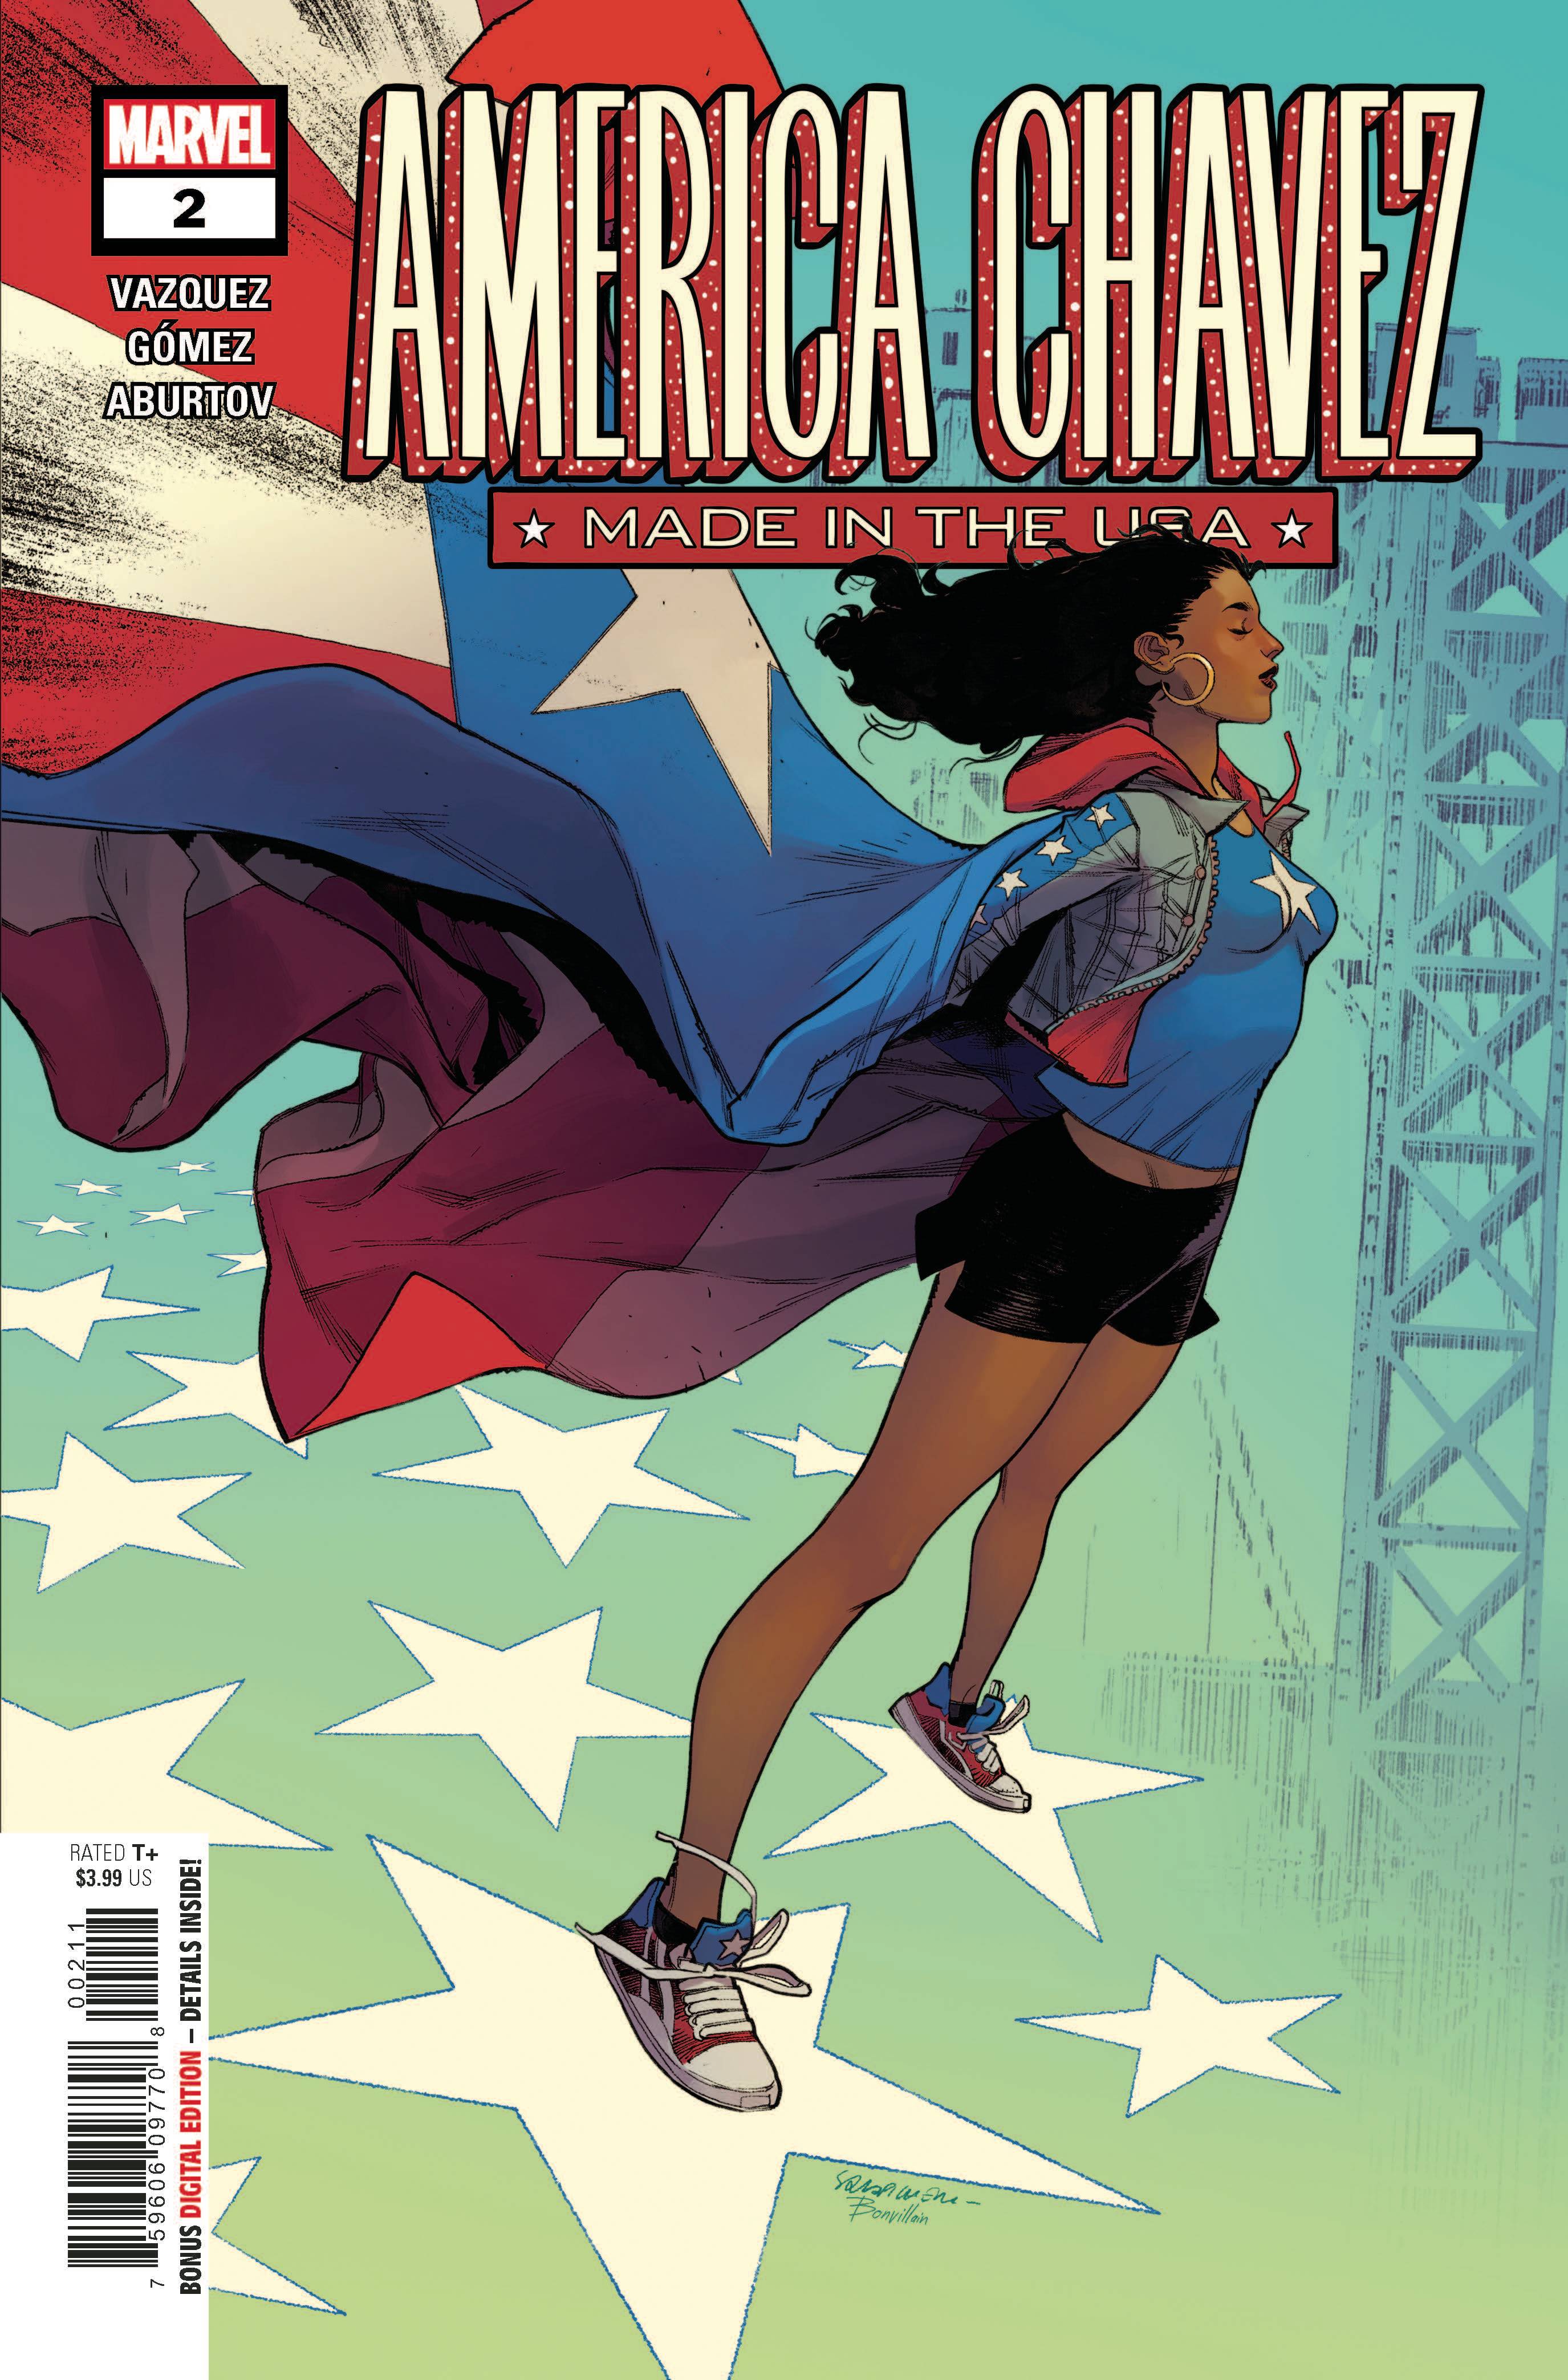 AMERICA CHAVEZ MADE IN USA #2 (OF 5)